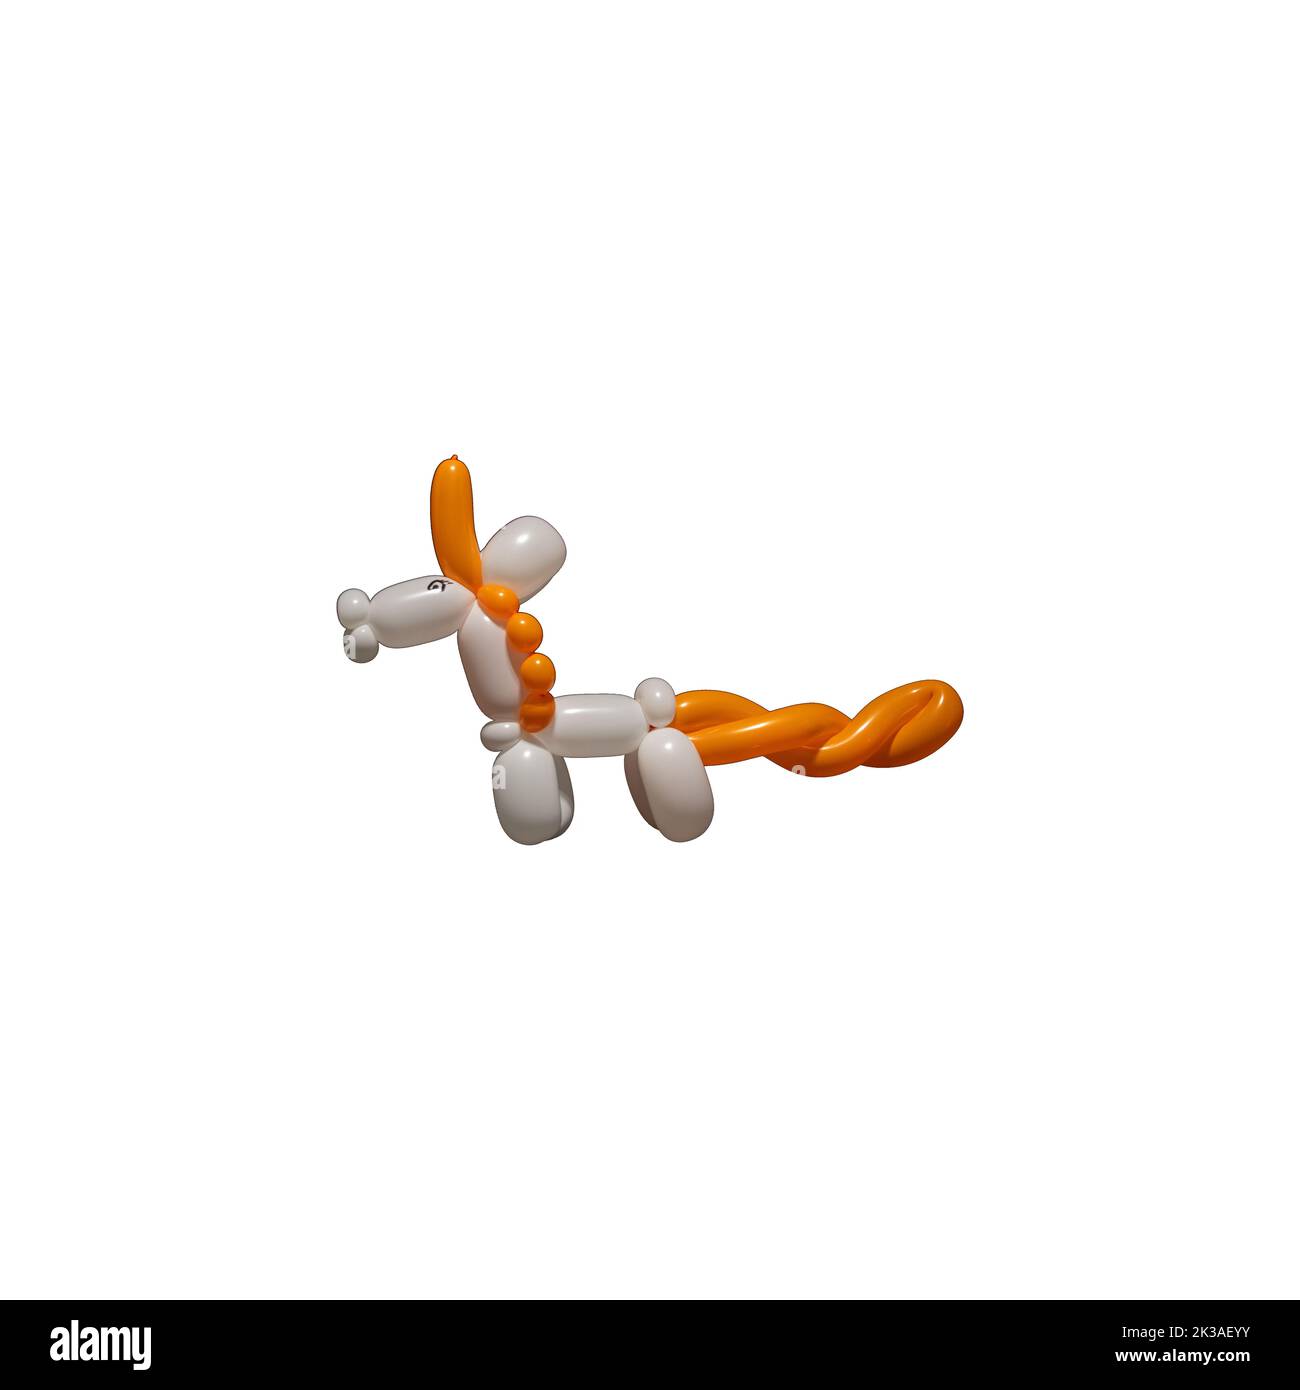 A cute white unicorn balloon animal with an orange mane, tail and horn like a clown or entertainer might make at a birthday party or event using ballo Stock Photo